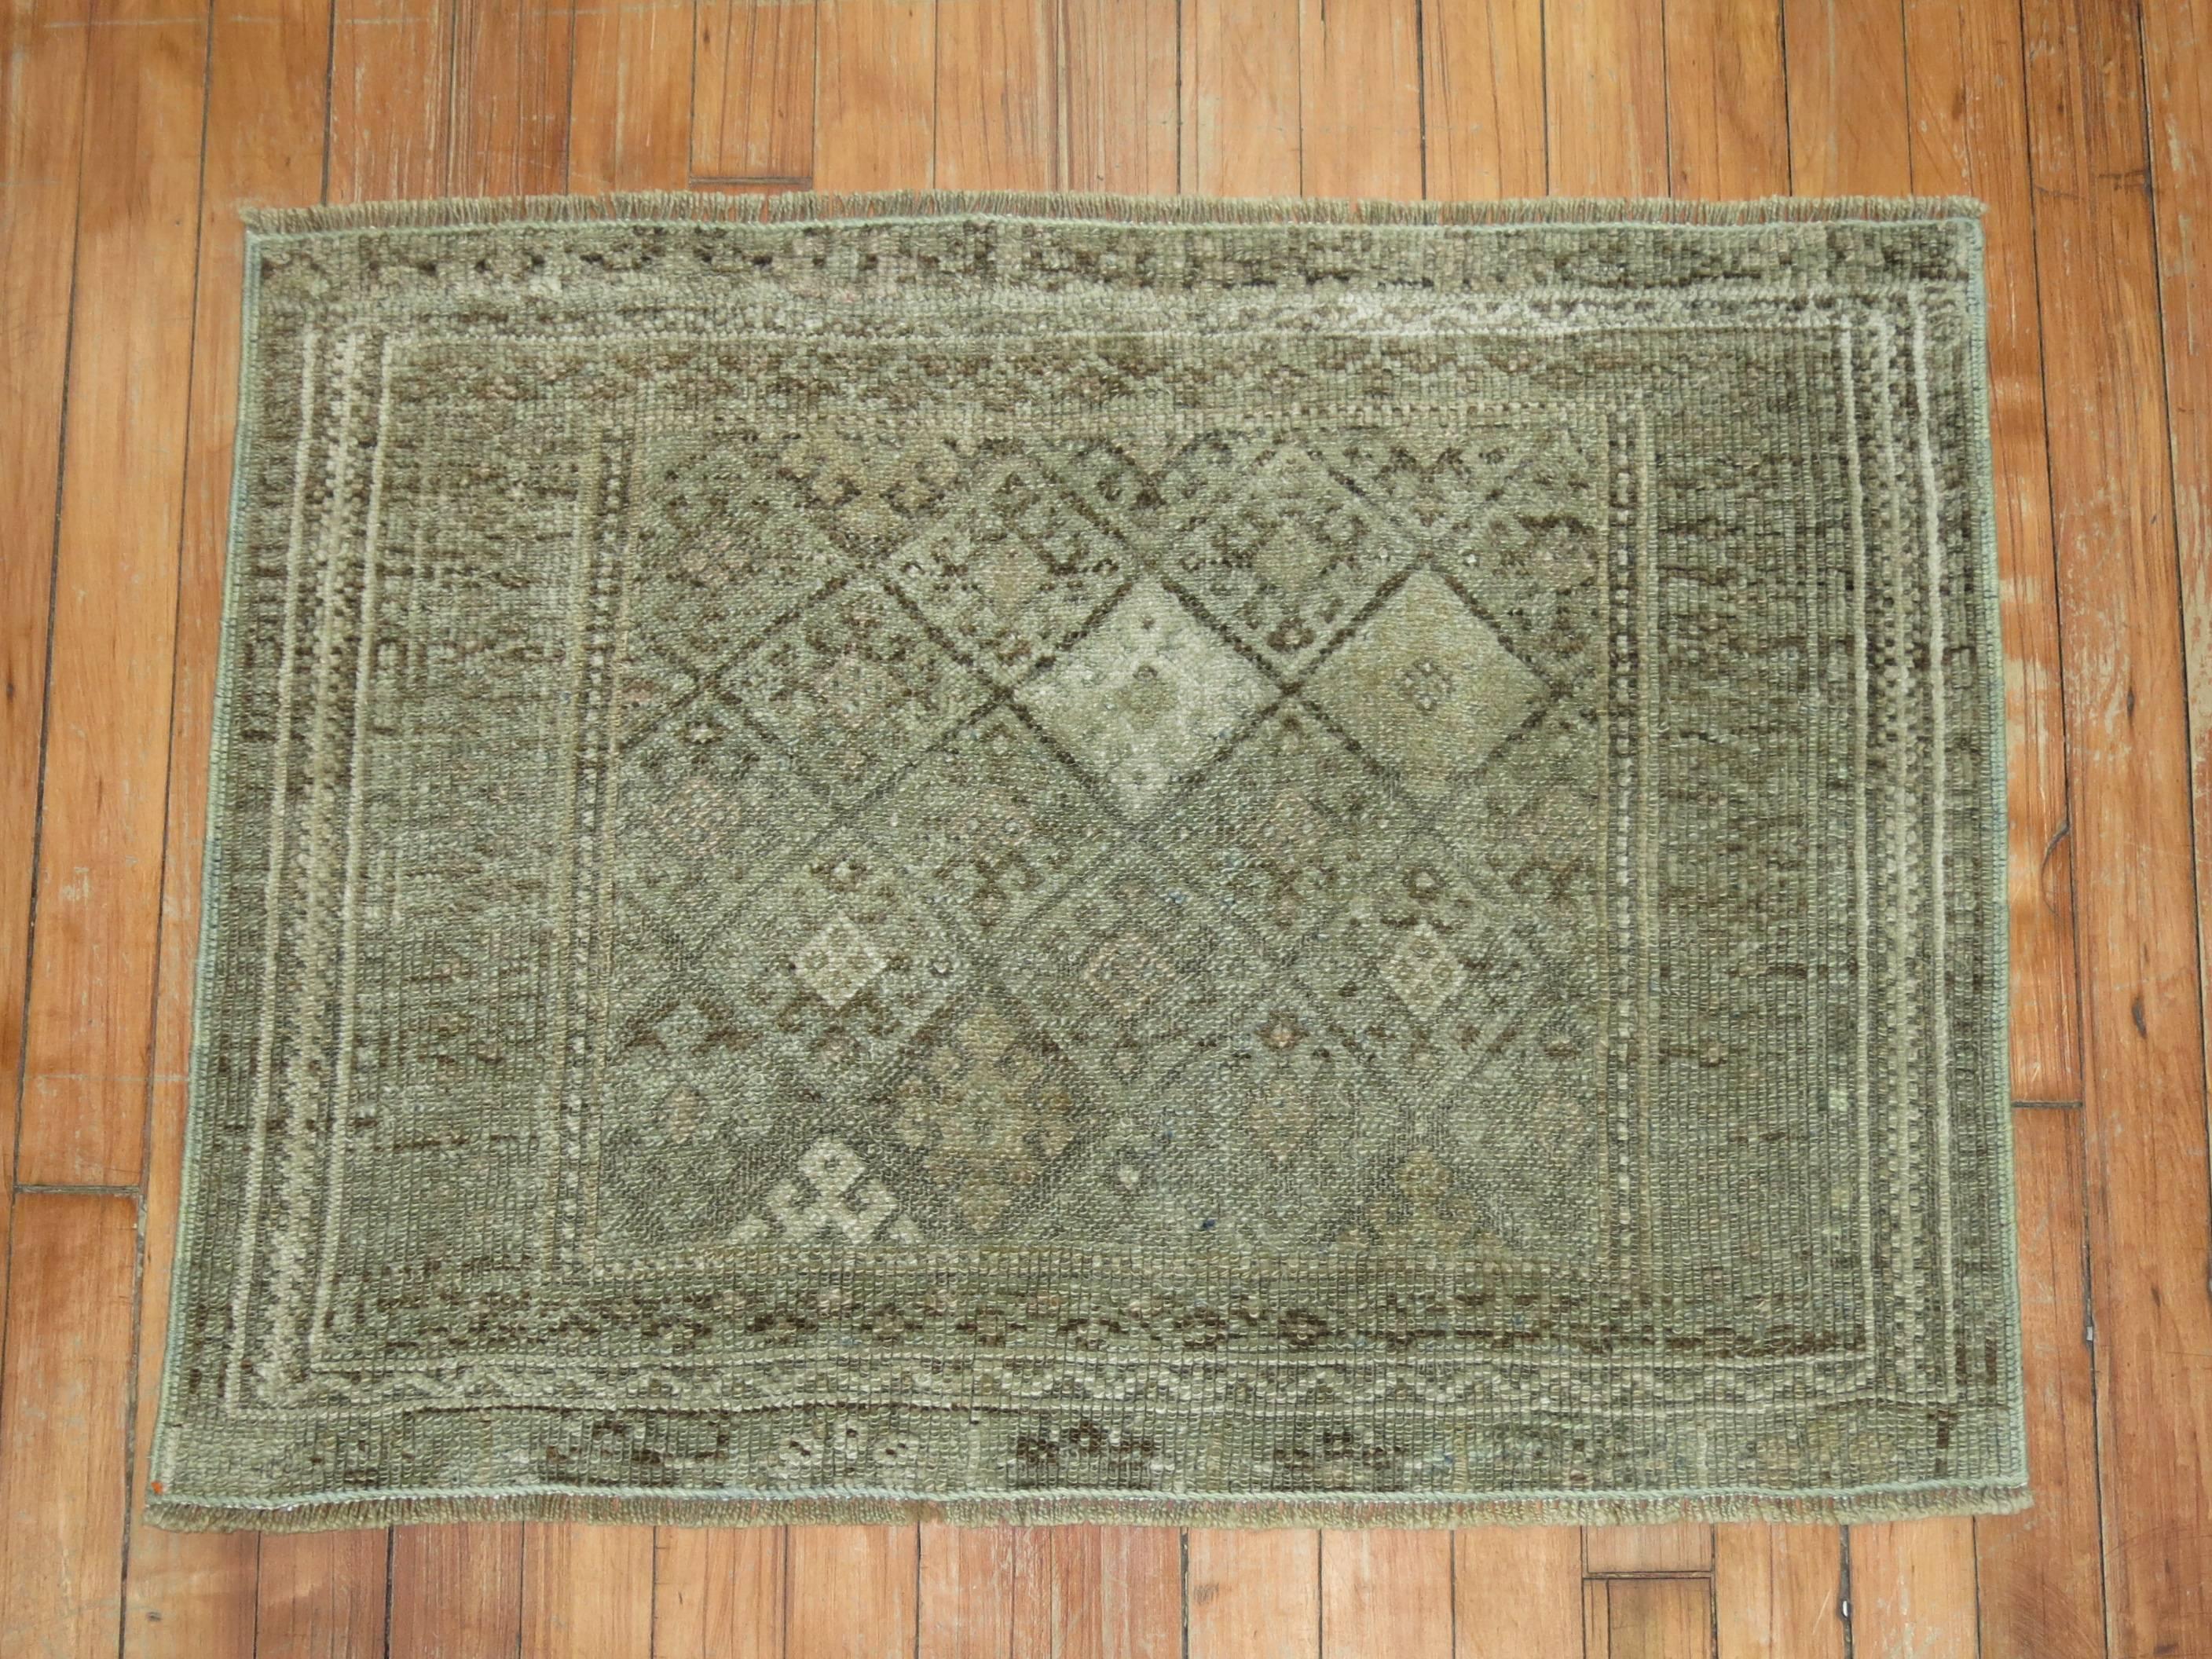 Hand-Woven Vintage Persian Jaff Rug